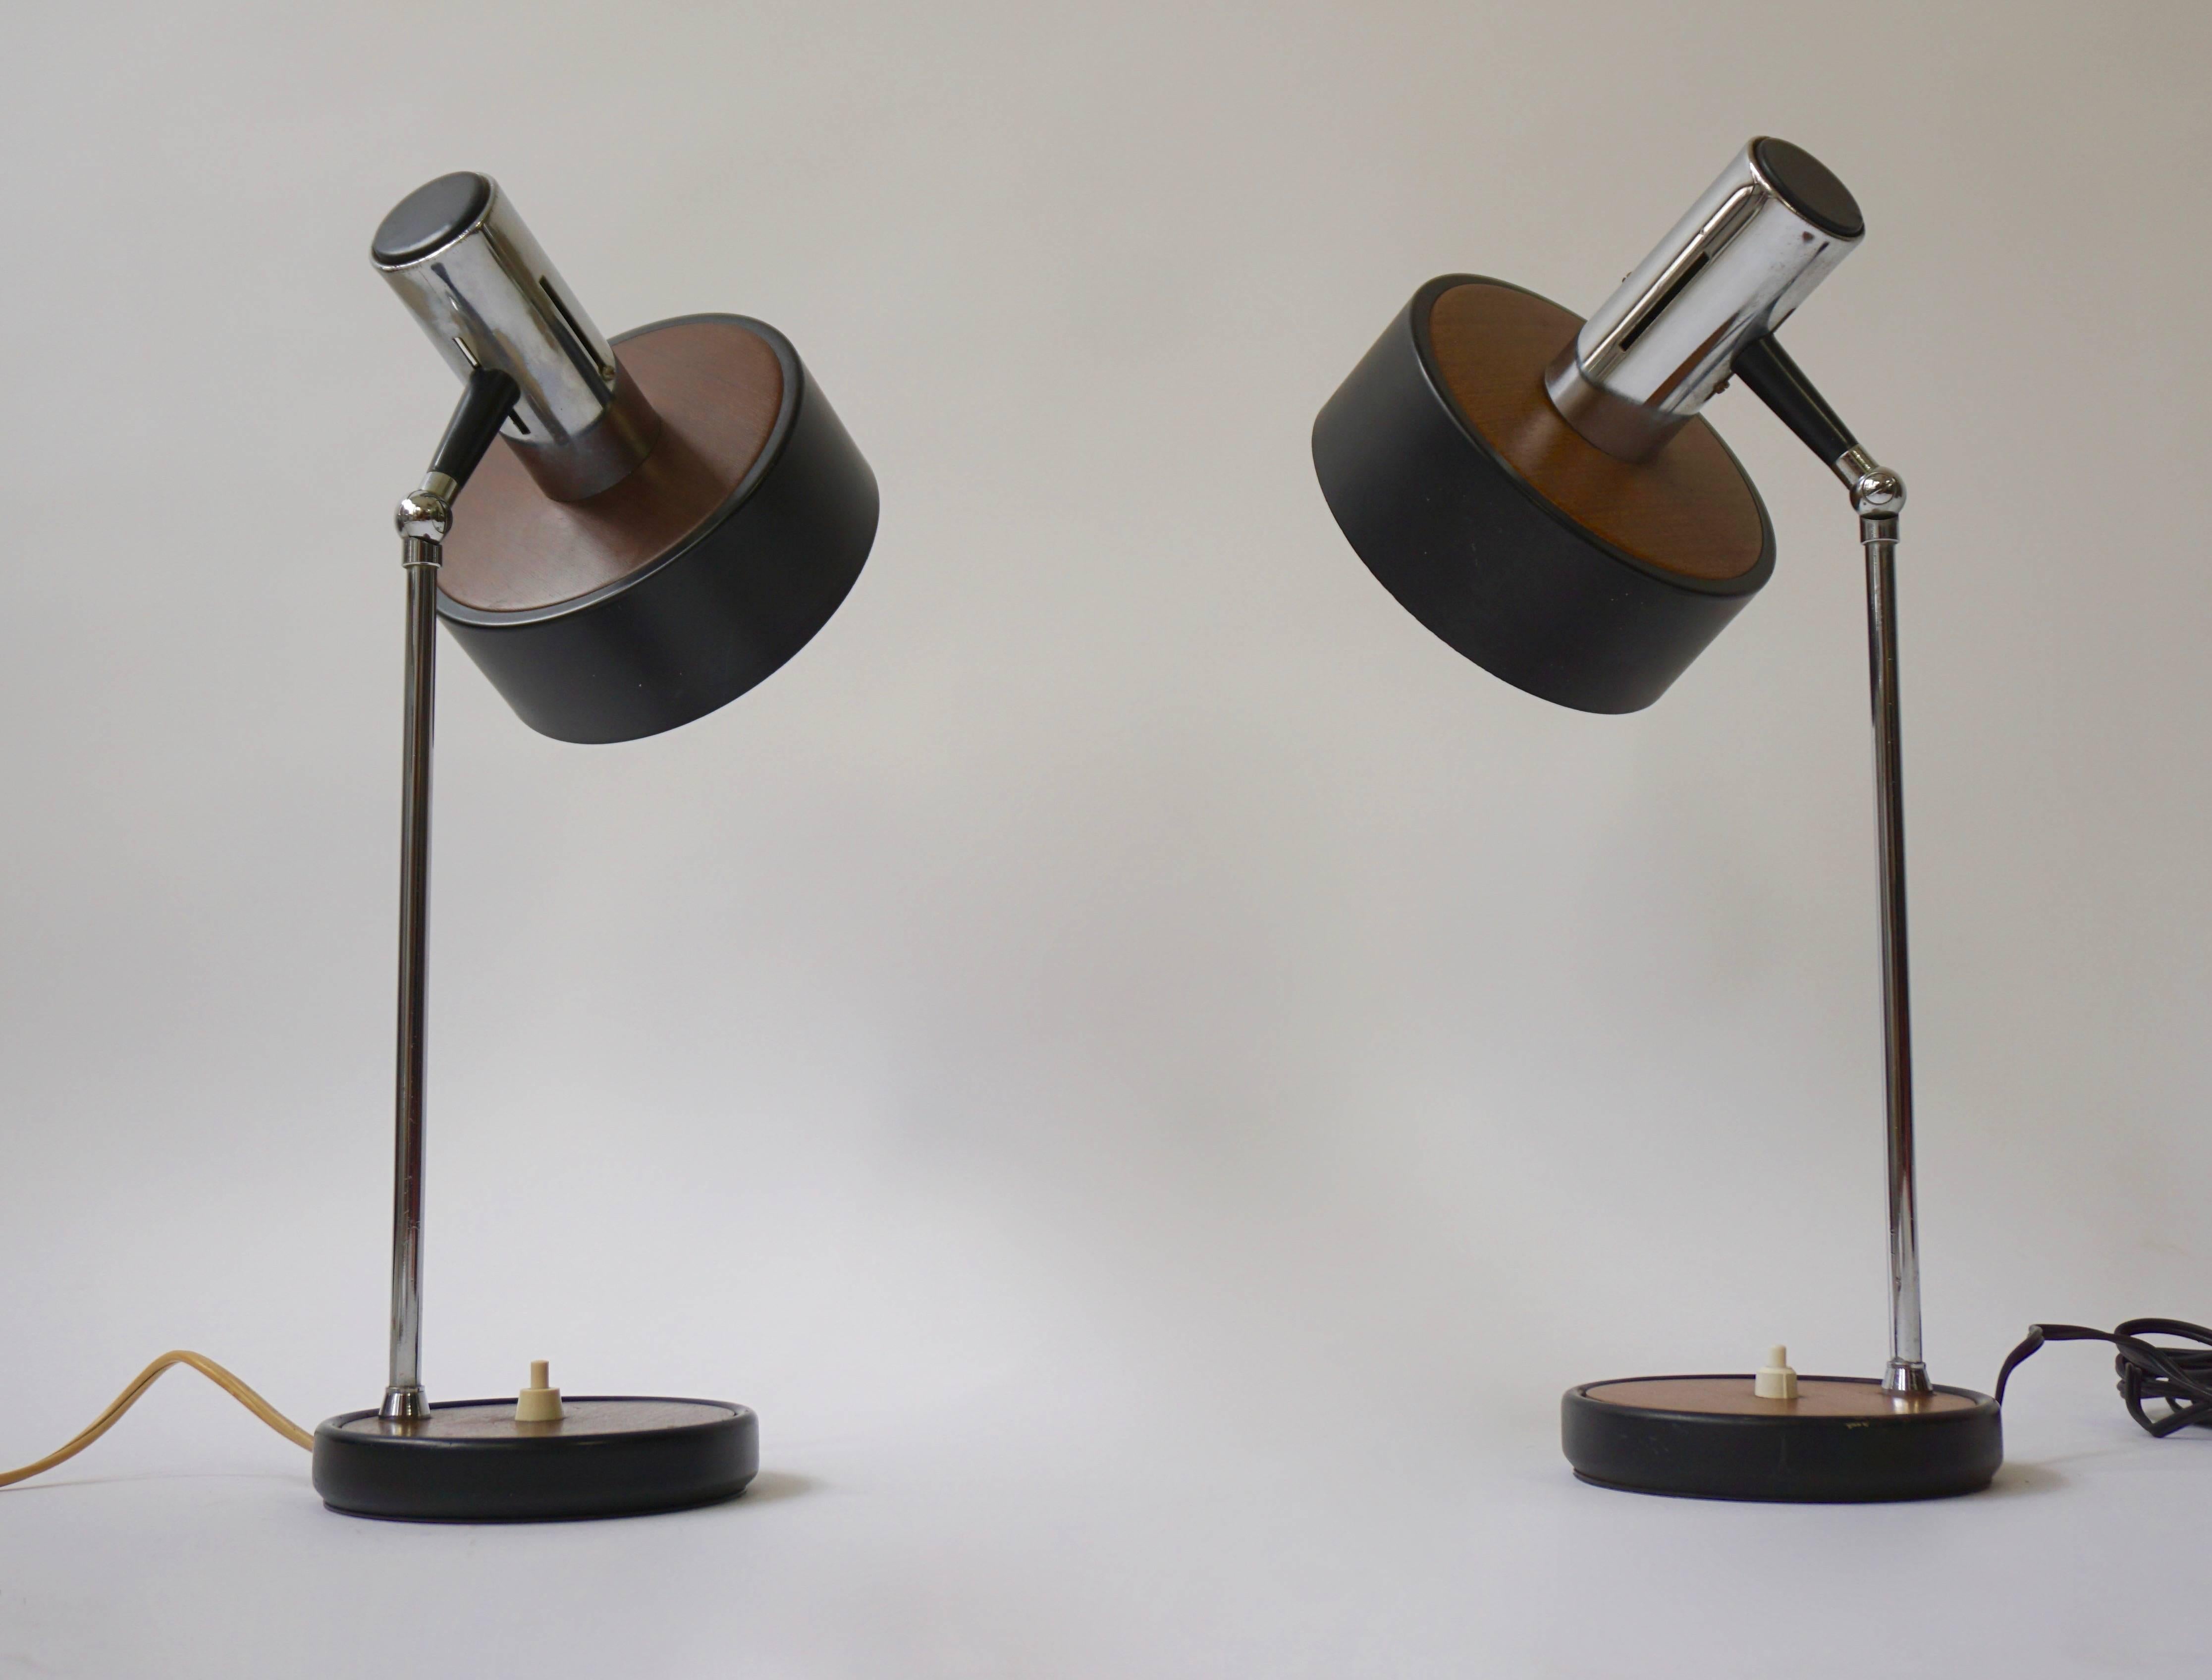 Two Italian adjustable desk lamps.
Dimensions: 20 cm diameter and 47 cm high.
One E27 bulb.